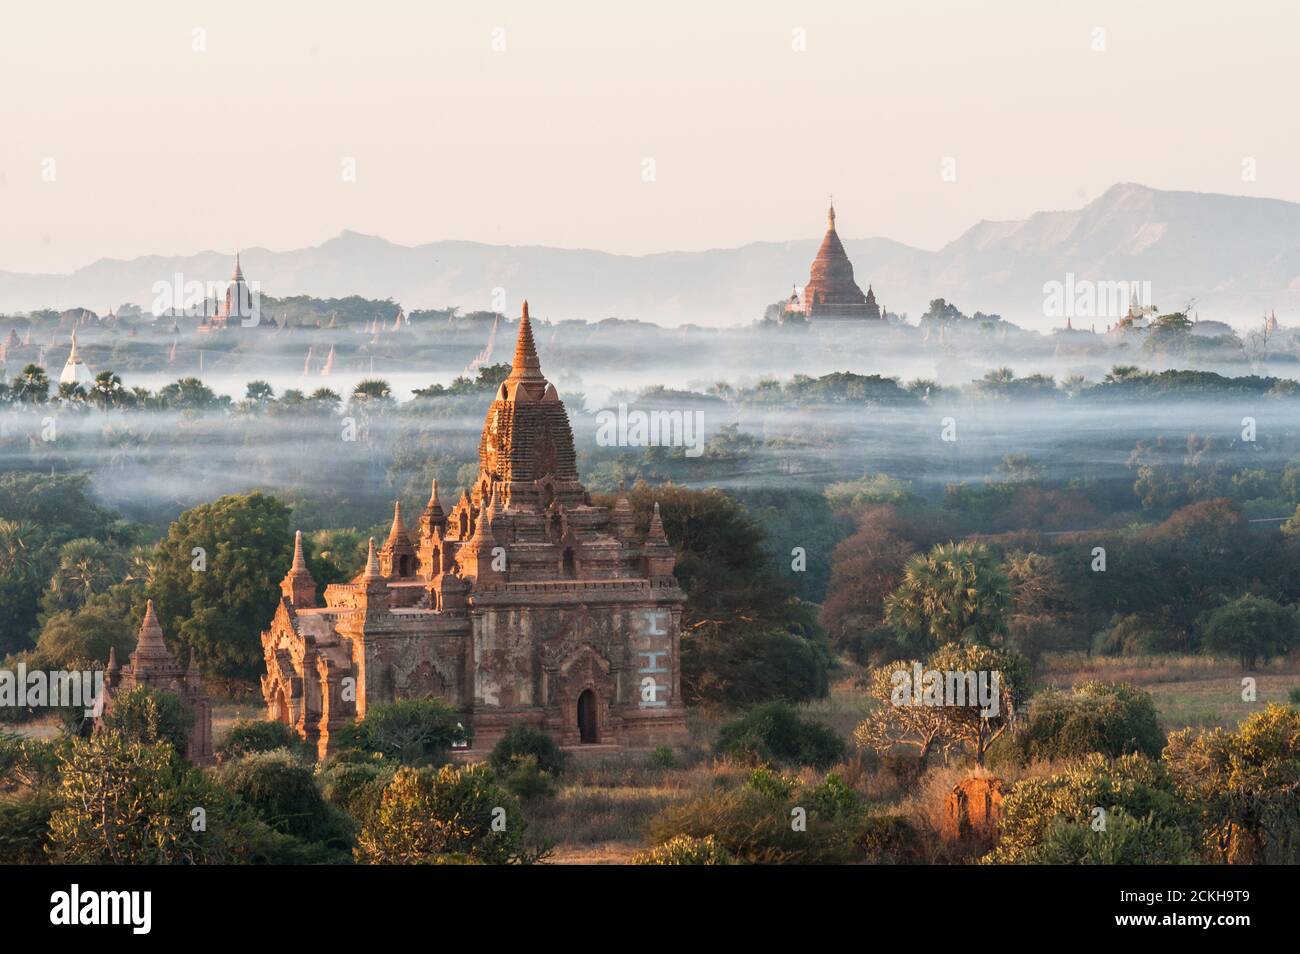 View from the Shwe Sandaw Pagoda during sunset in Bagan, Myanmar Stock Photo